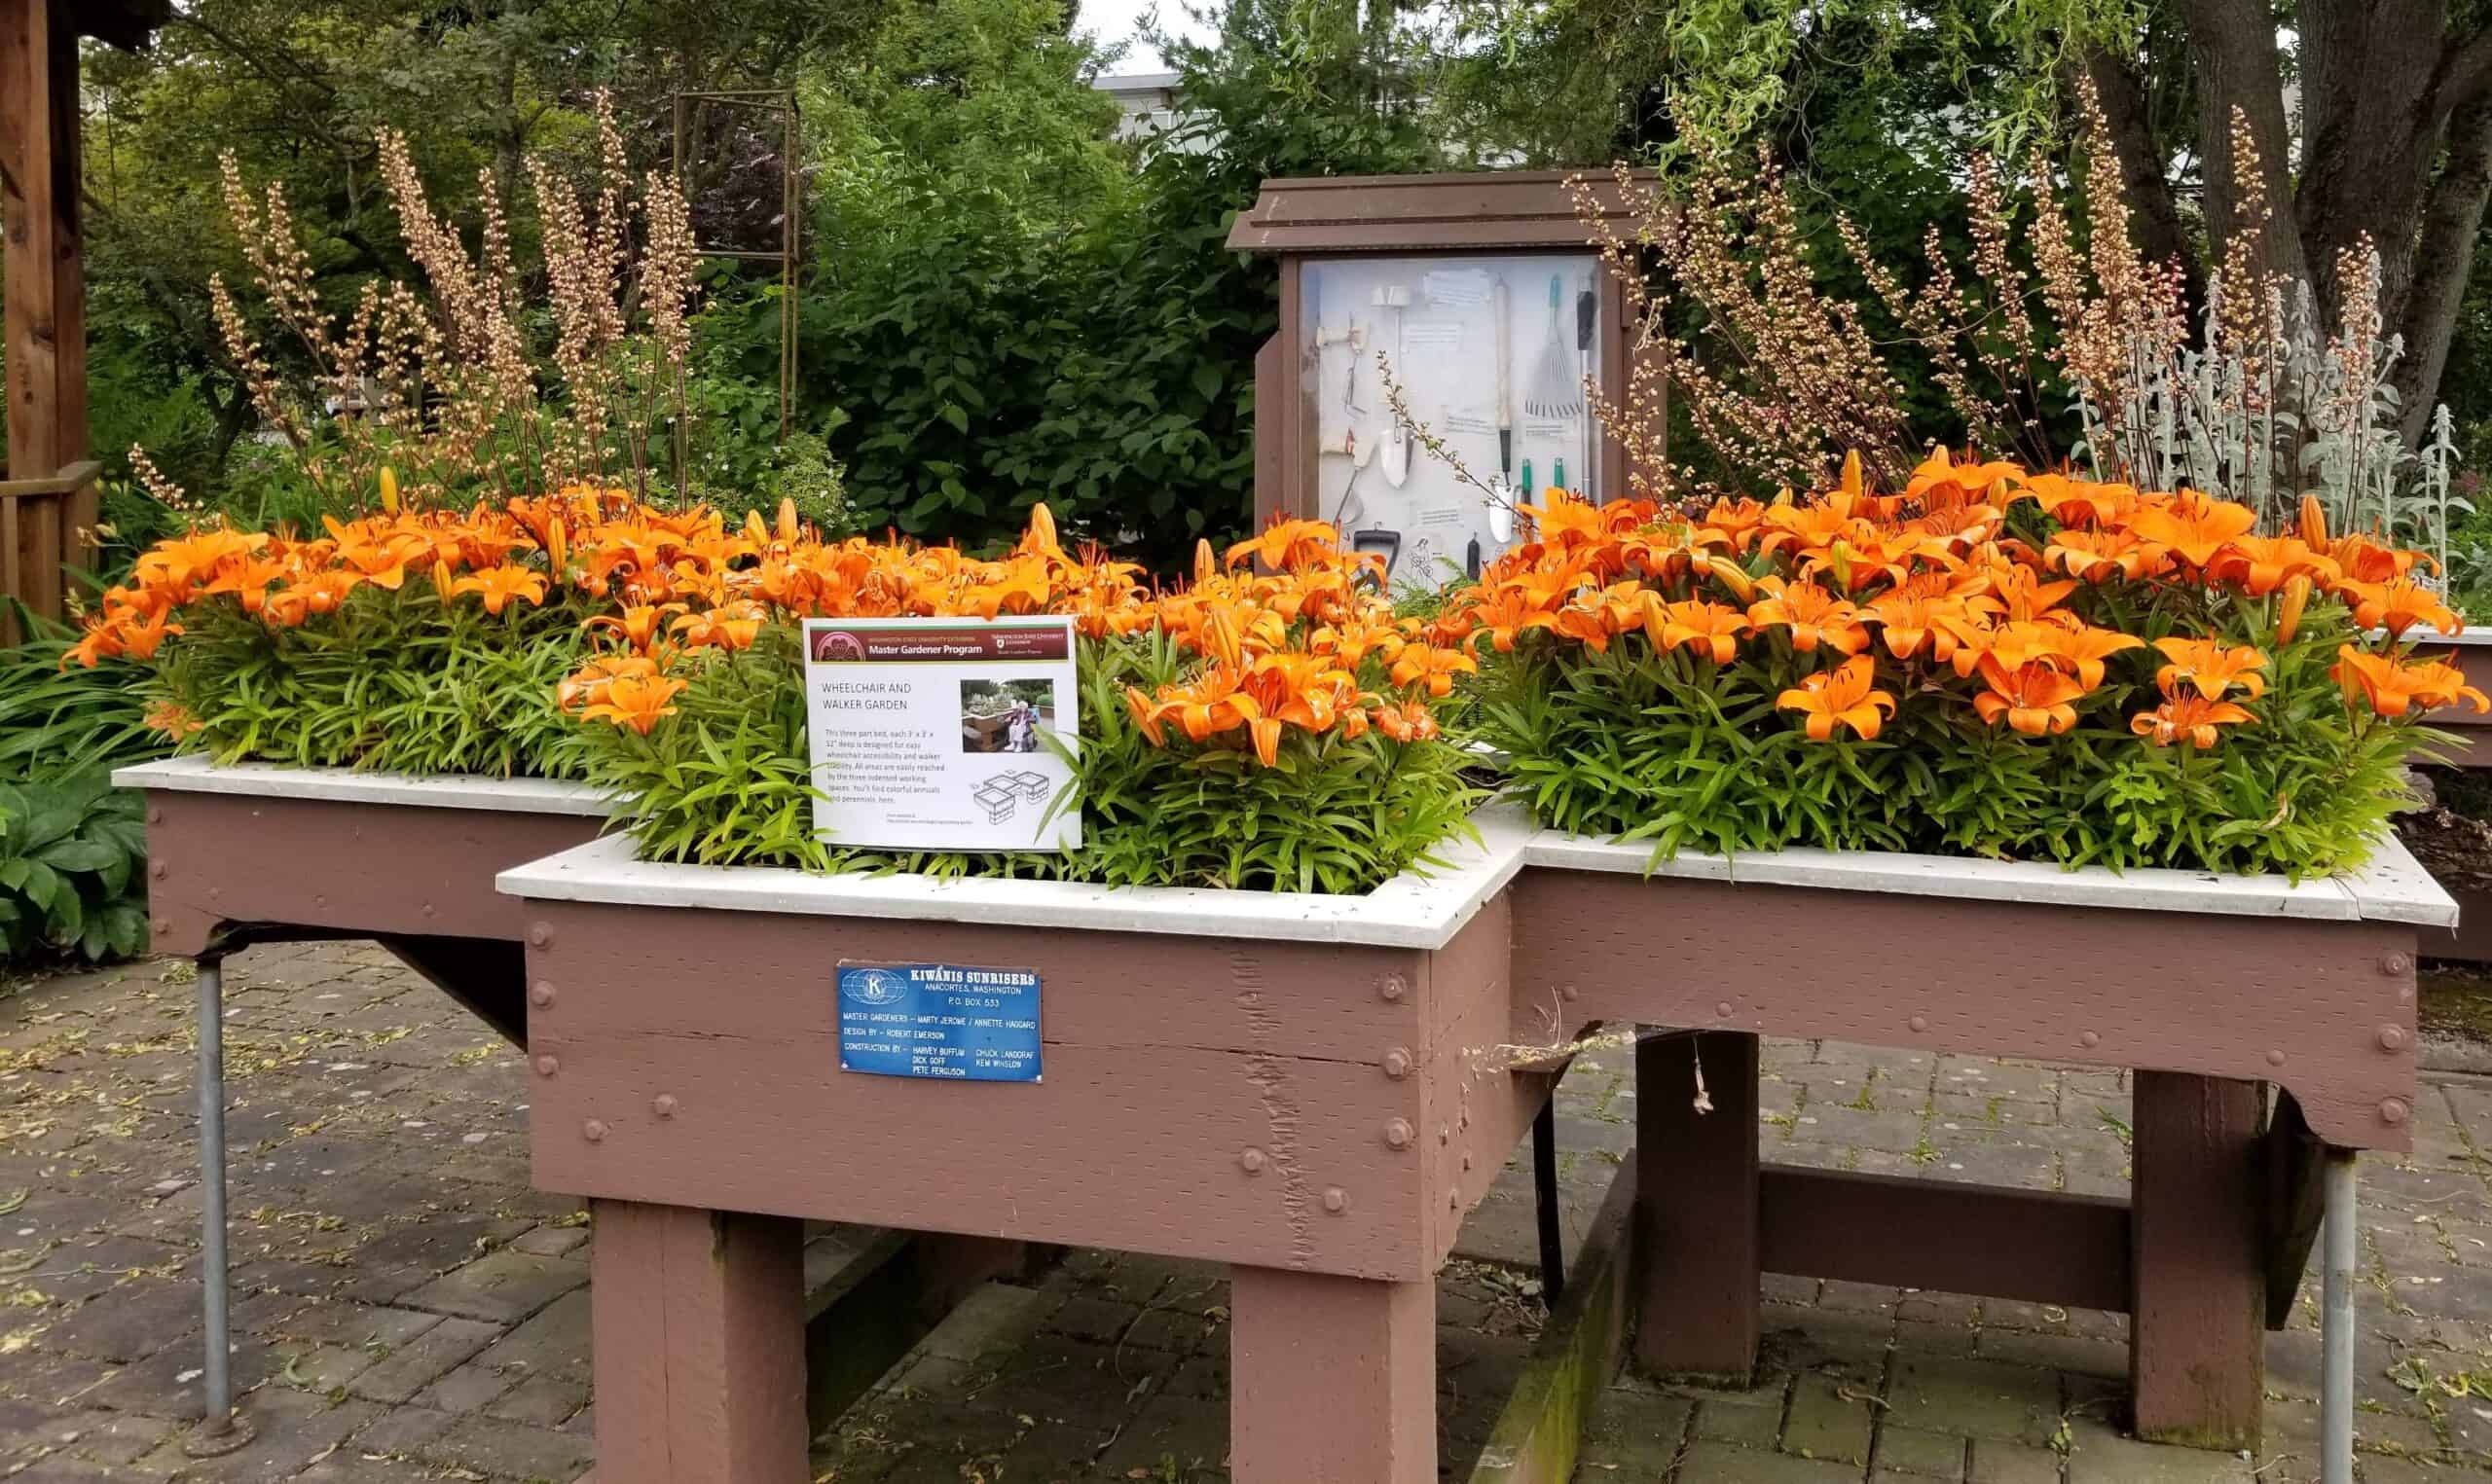 Dwarf Asiatic Lilies in raised bed with adapted tool display